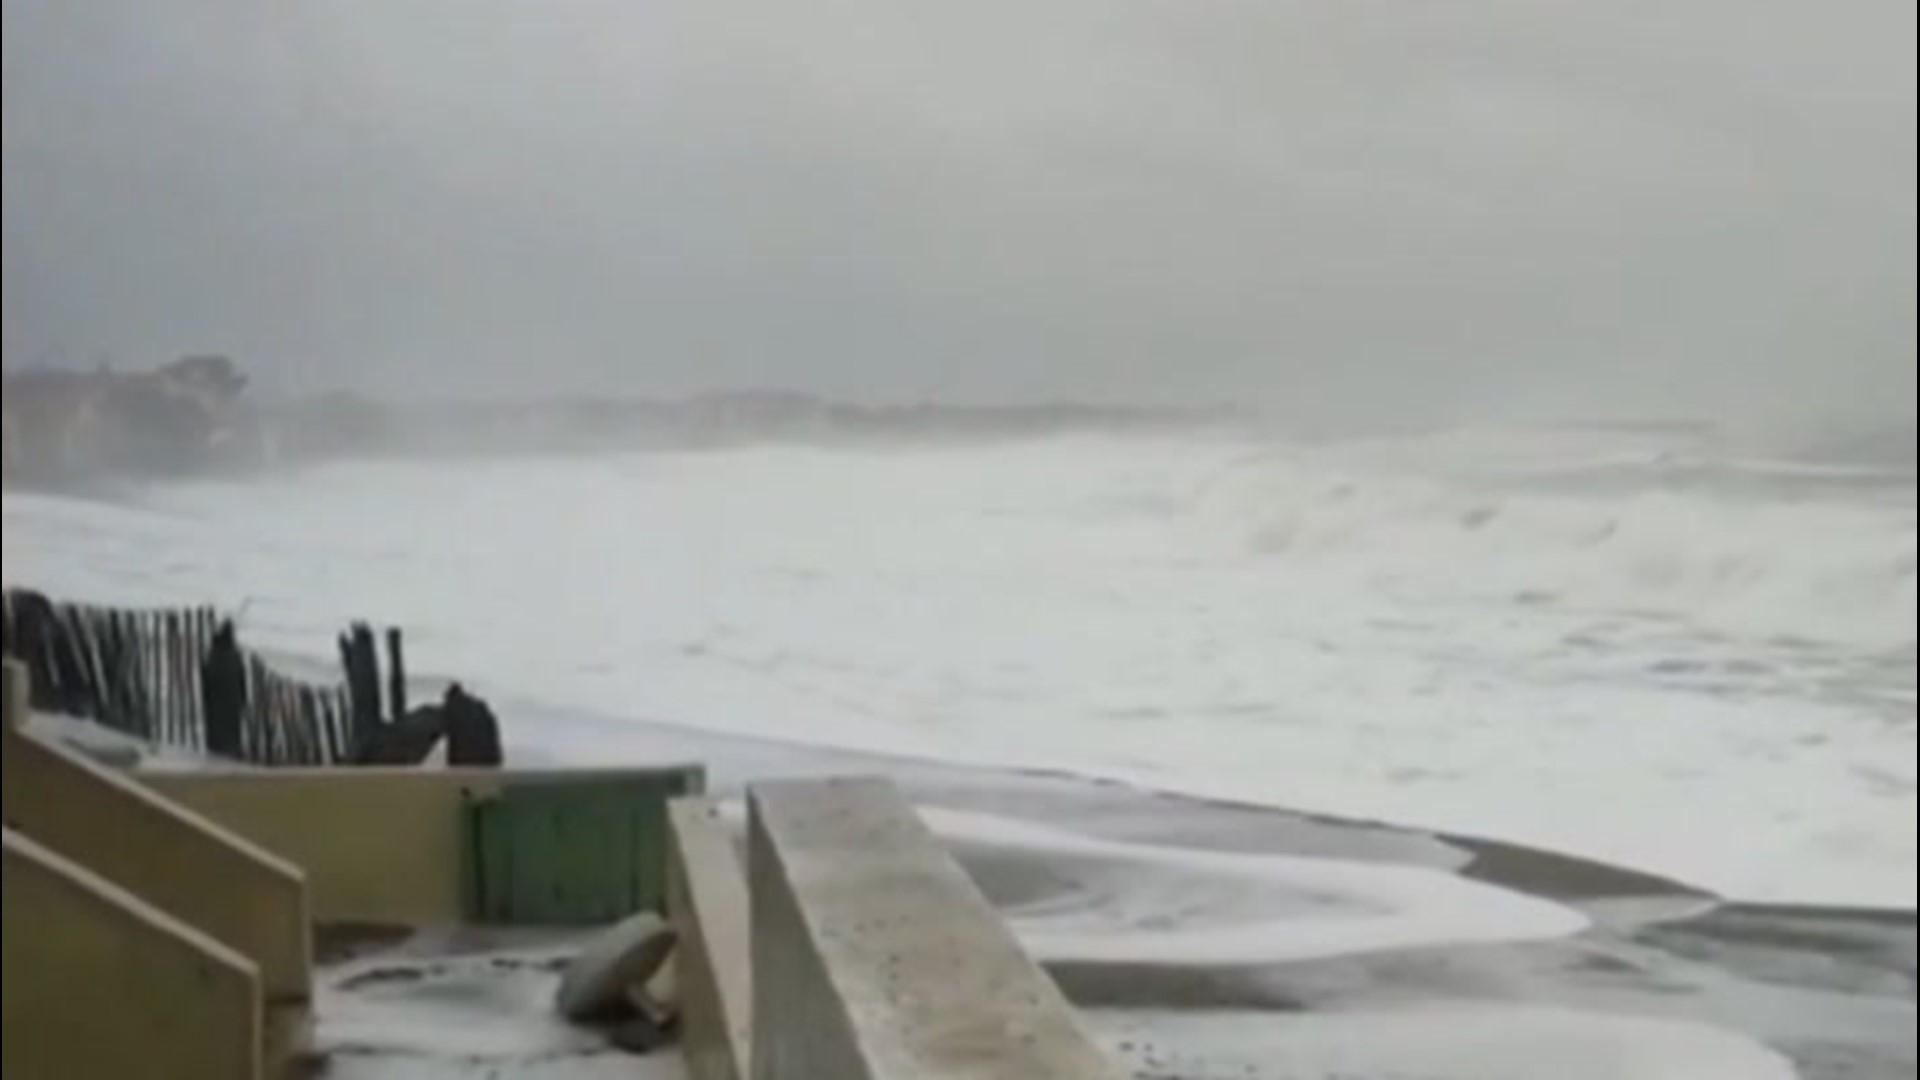 The coastal town of Argelès-sur-Mer, France, was hammered by big waves as Storm Gloria lashed the area on Jan. 21.